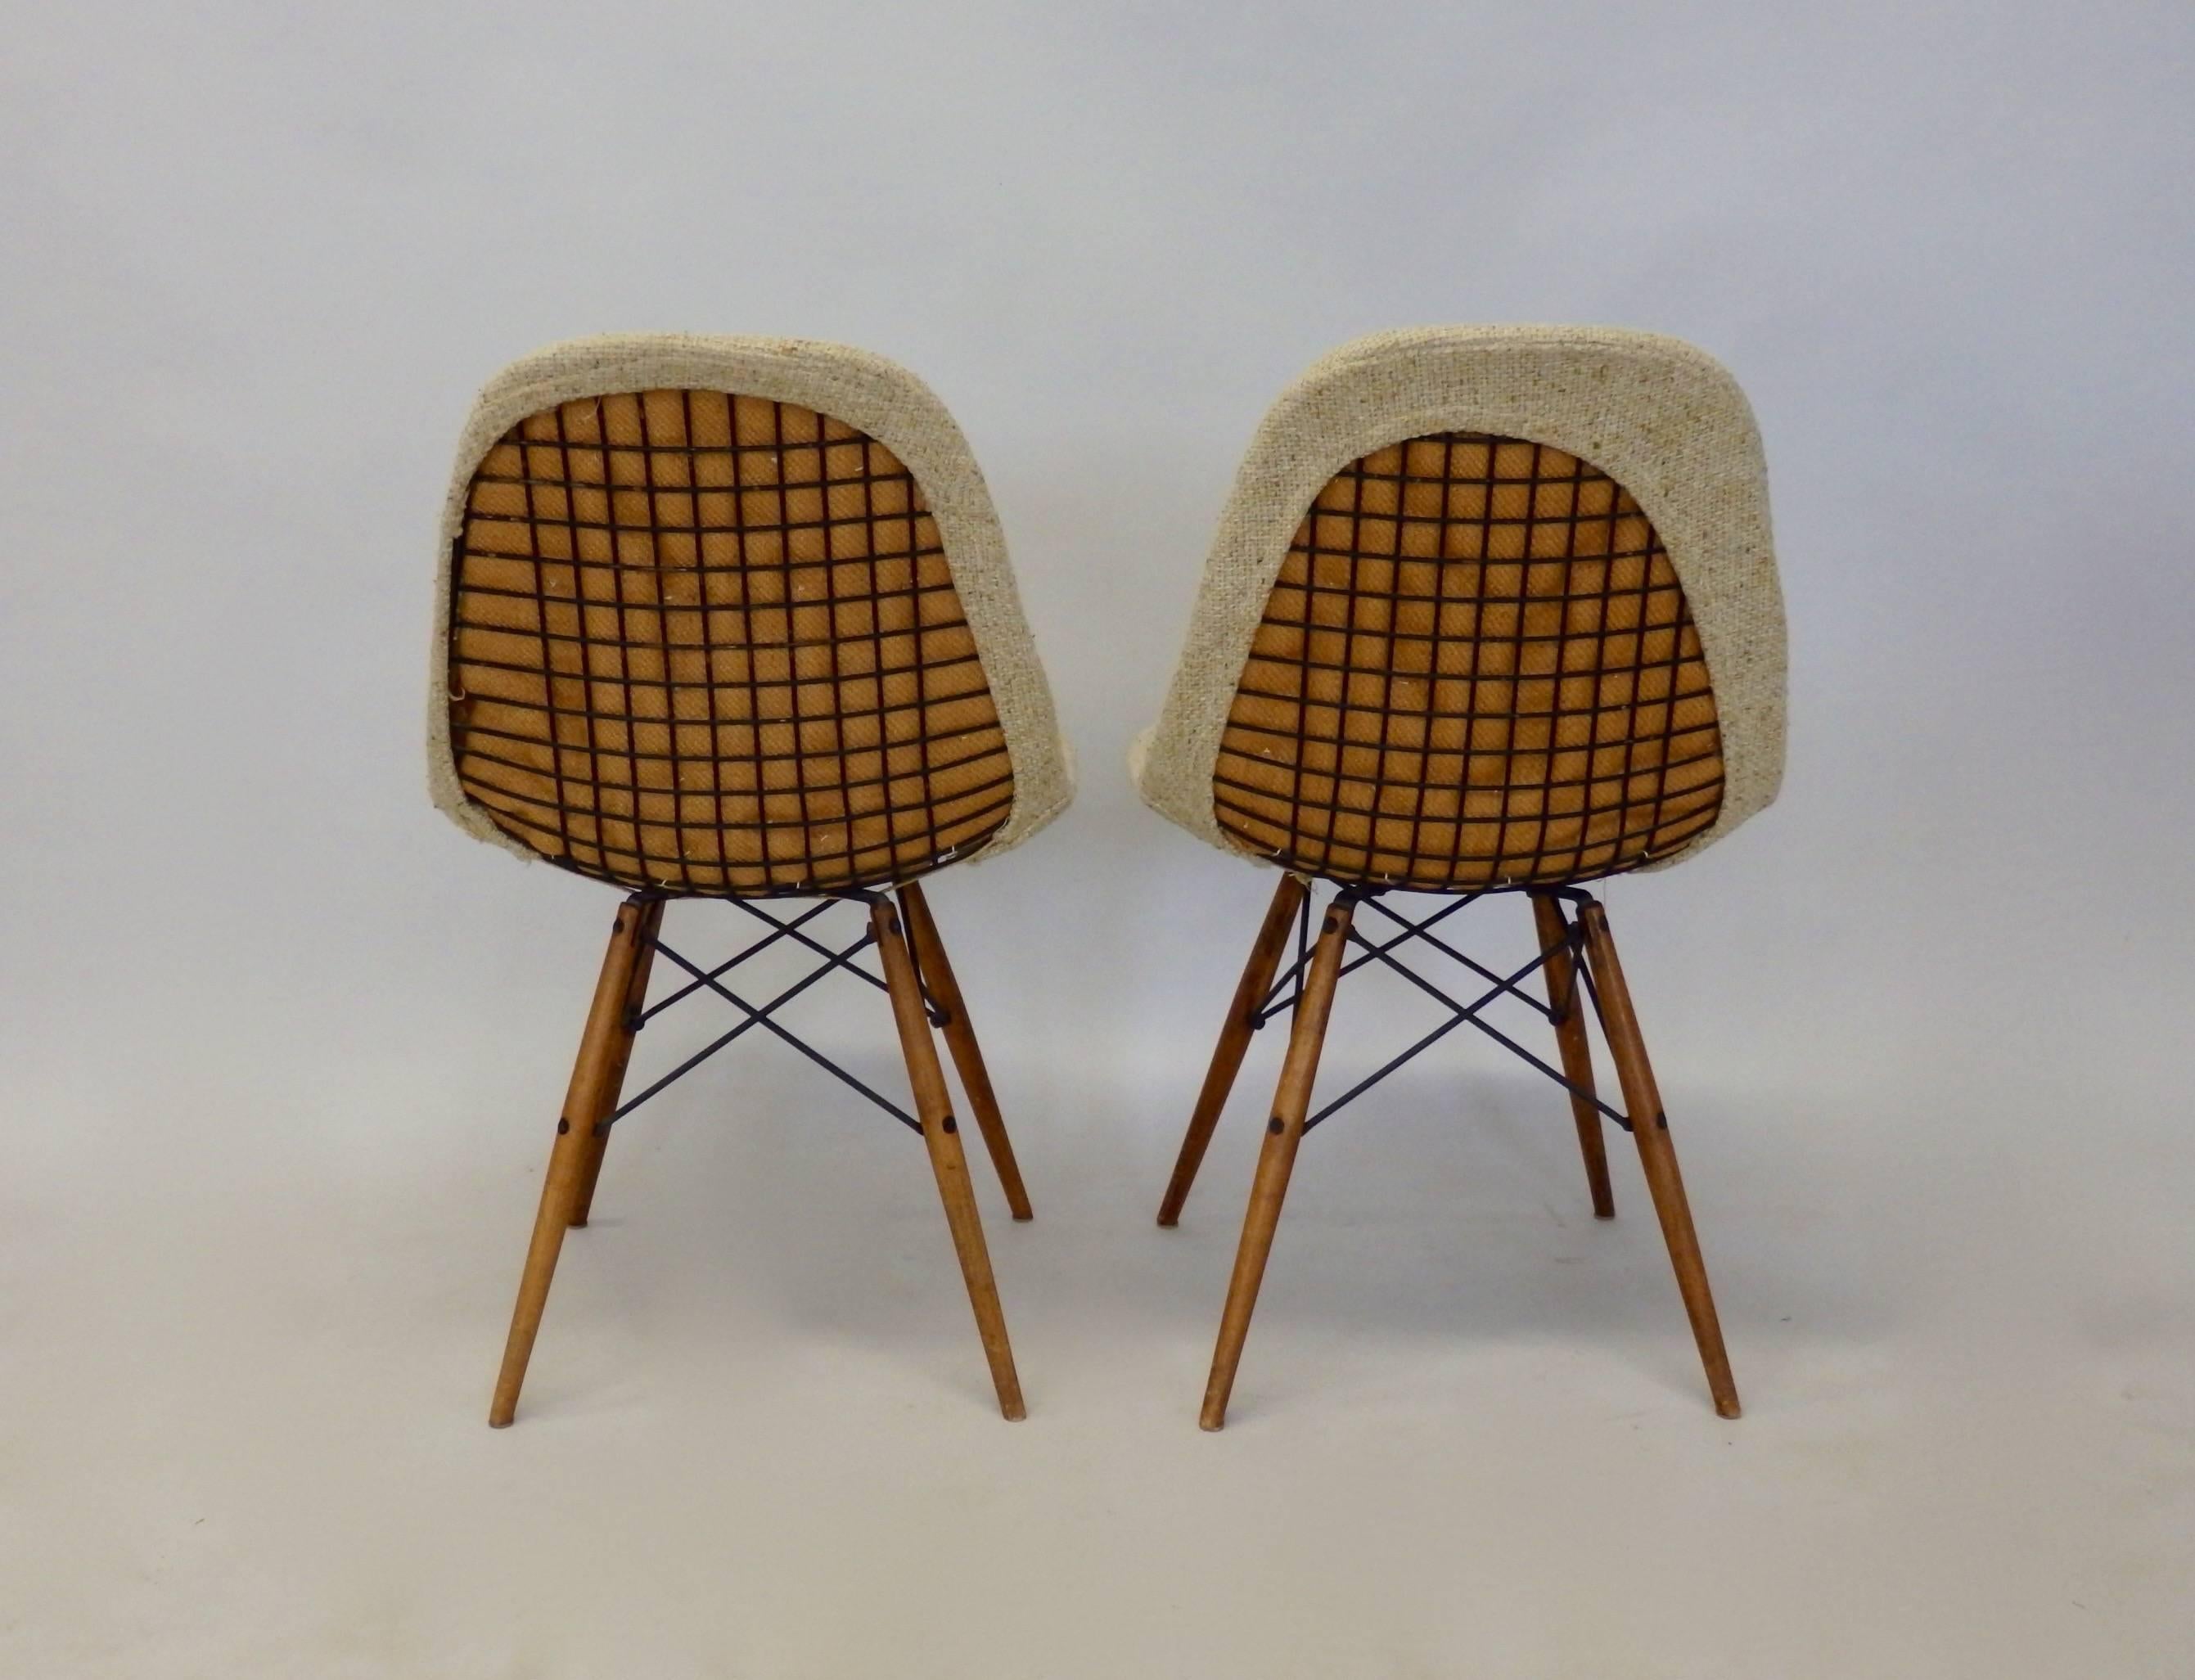 Pair of early production Charles and Ray Eames dowel leg dining chairs. Very nice as found patina / condition.